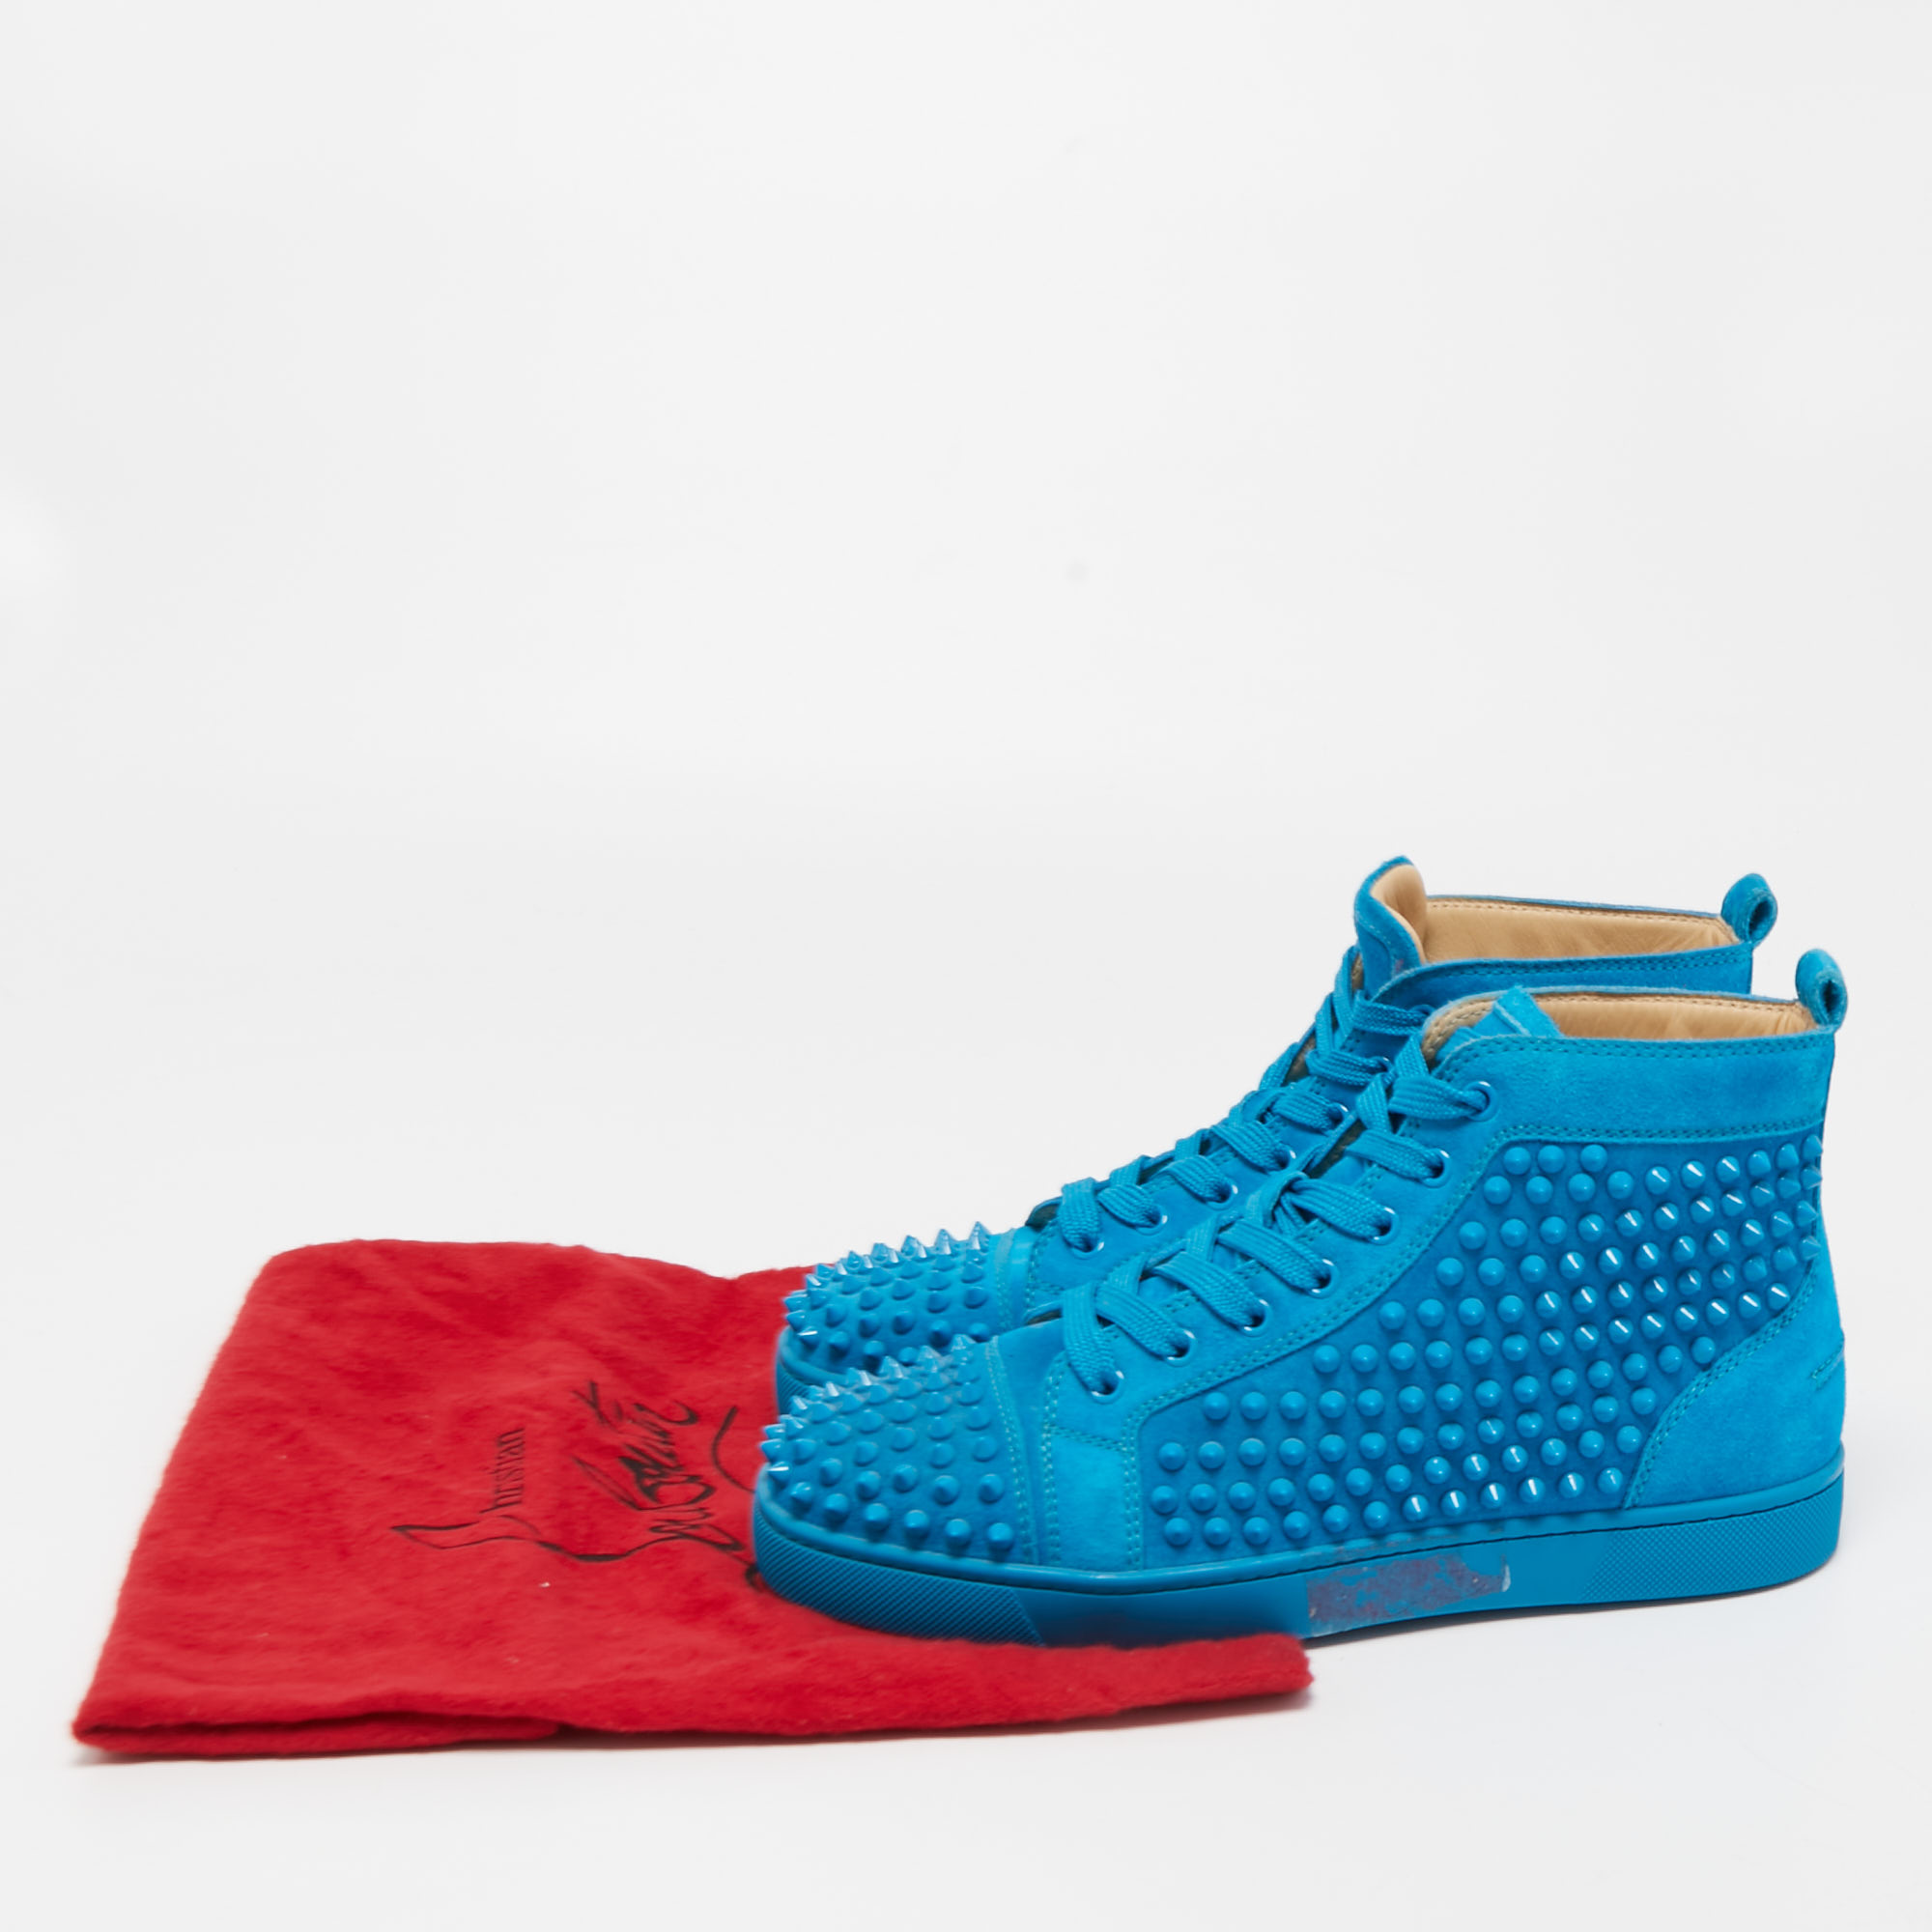 Christian Louboutin Blue Suede Louis Spike High Top Sneakers Size 39.5